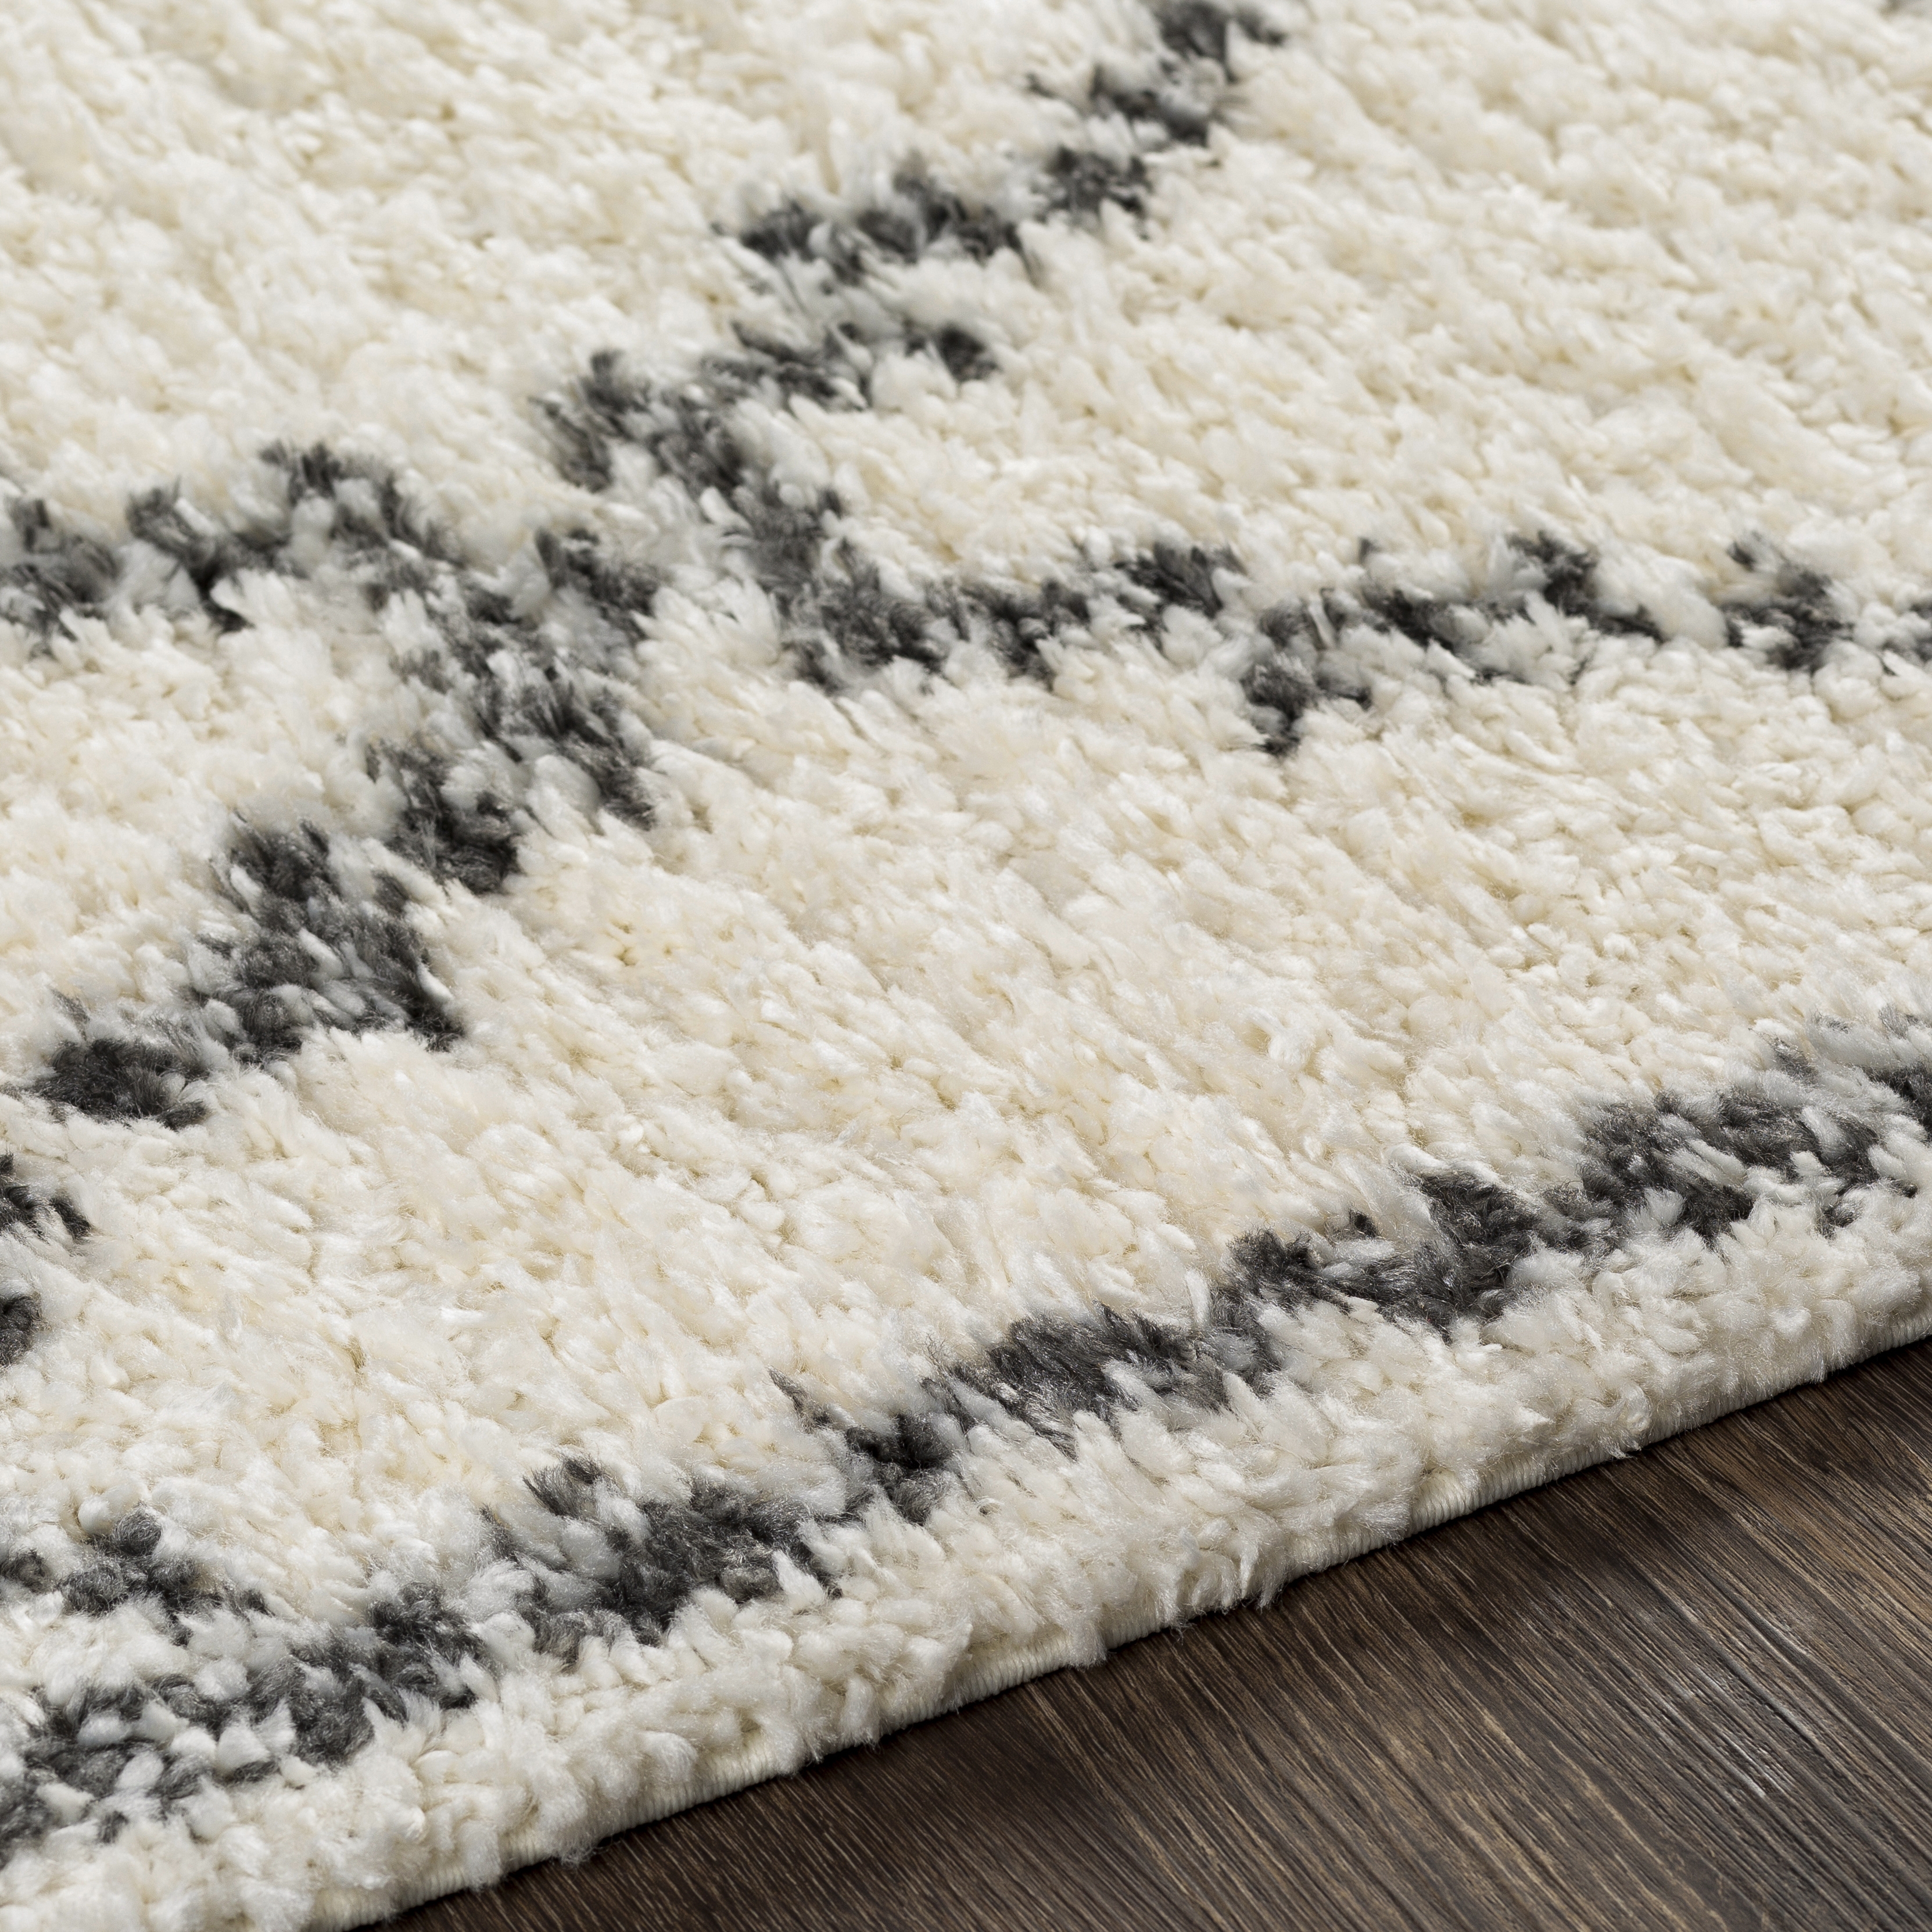 Deluxe Shag Rug, 7'10" x 10'3" - Image 3